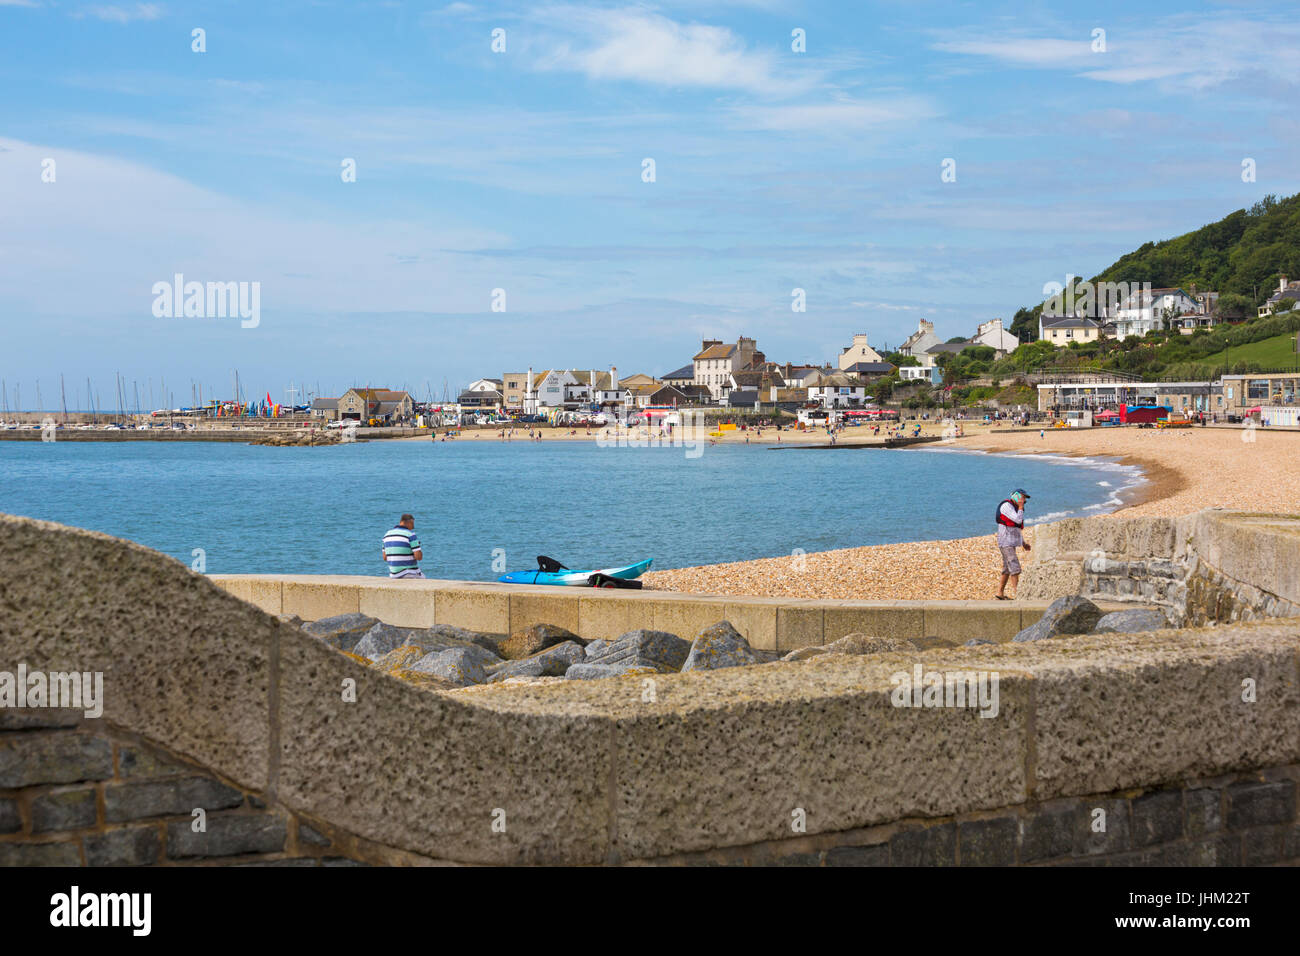 View of Lyme Bay and beach town of Lyme Regis at Lyme Regis, Dorset in July Stock Photo